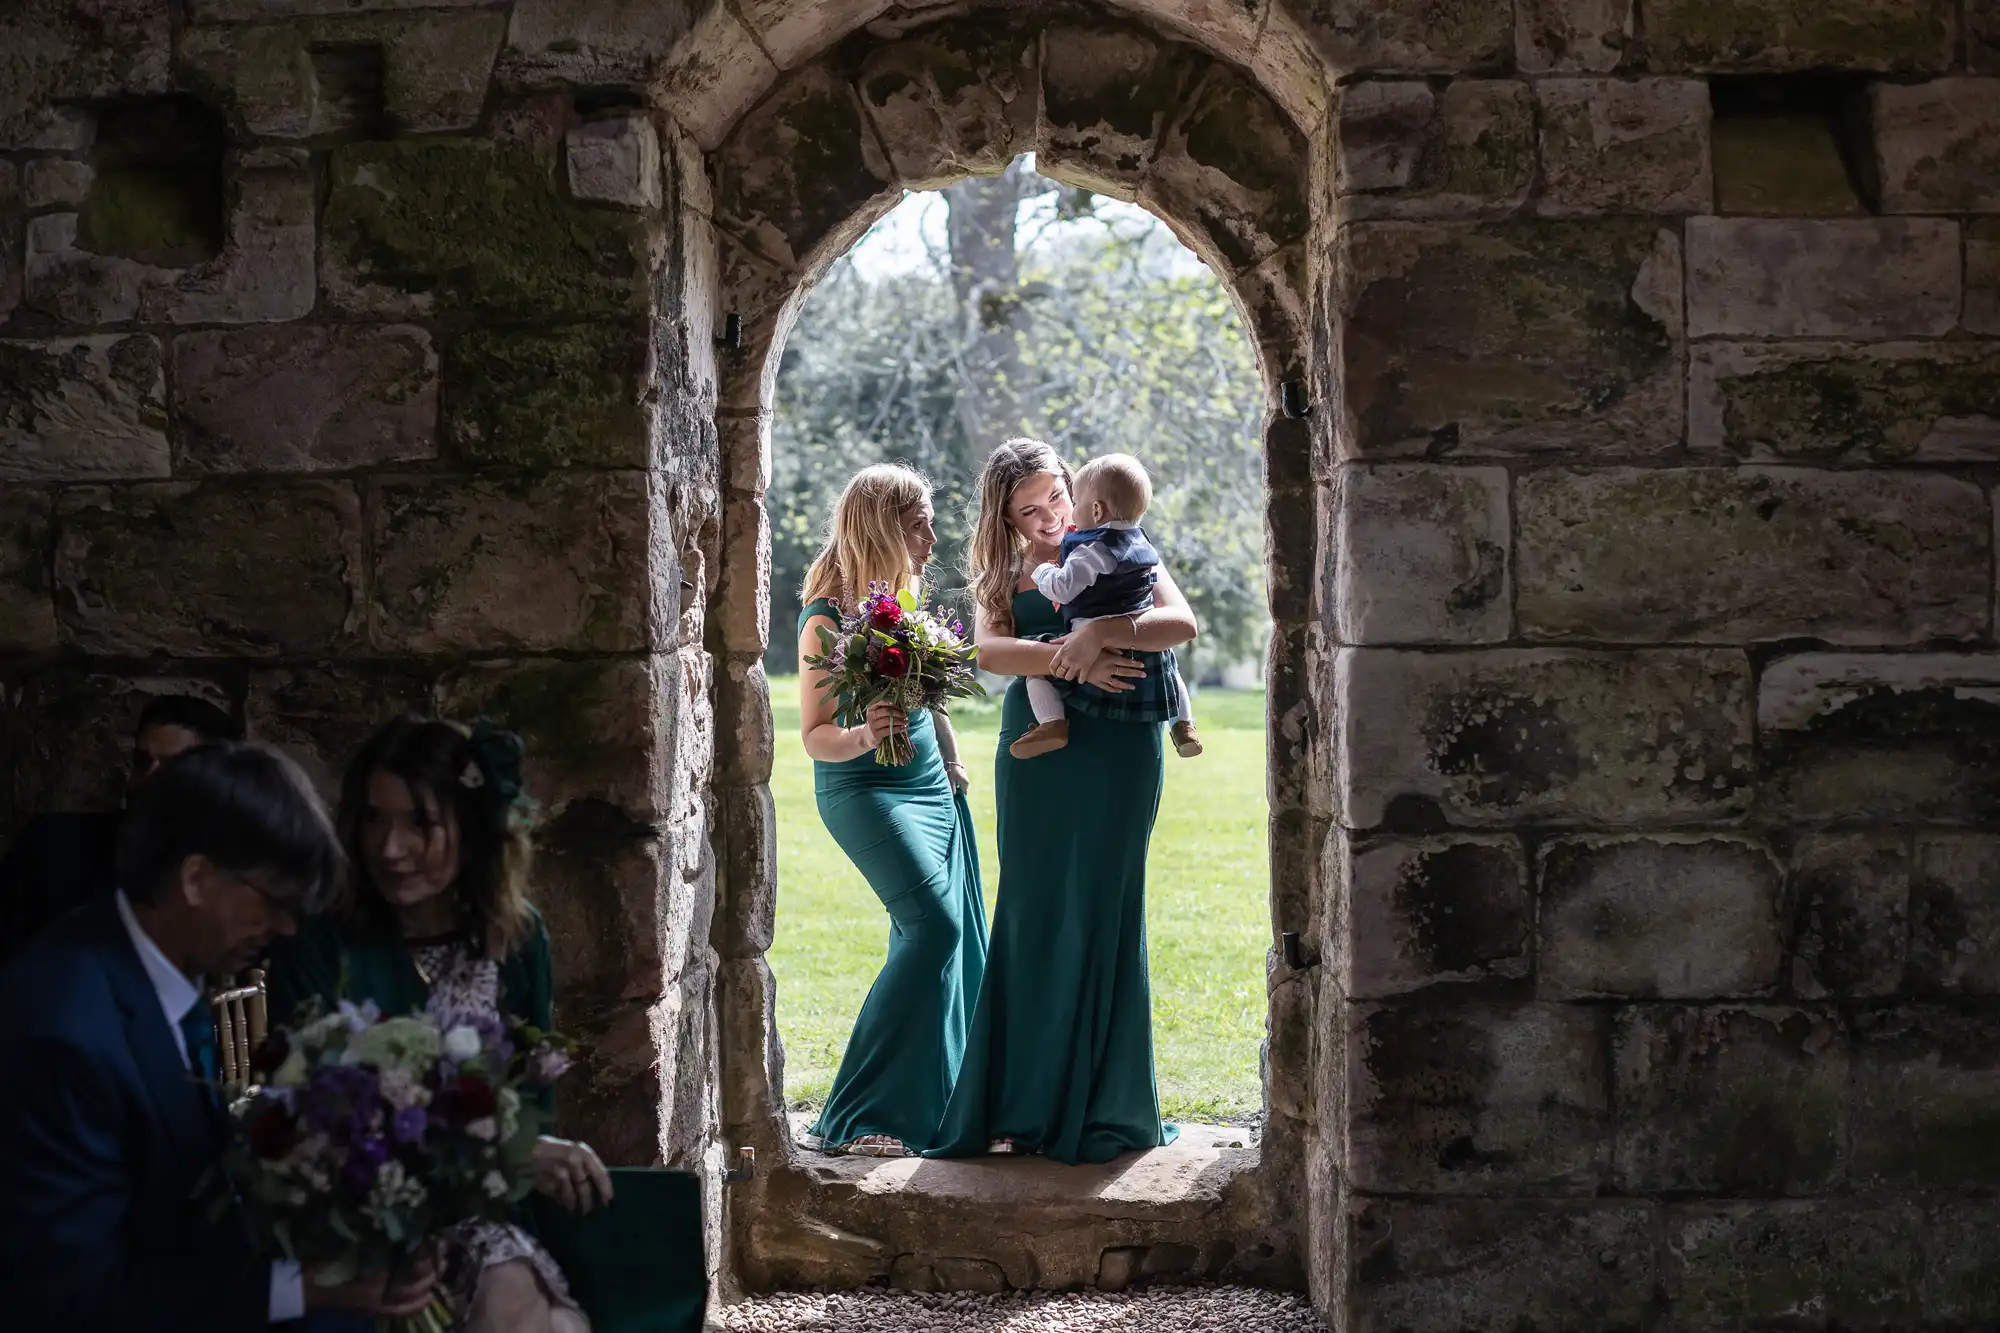 Two women in green dresses stand in a stone archway; one holds a bouquet of flowers and the other holds a child. People are seated with flowers in the foreground.